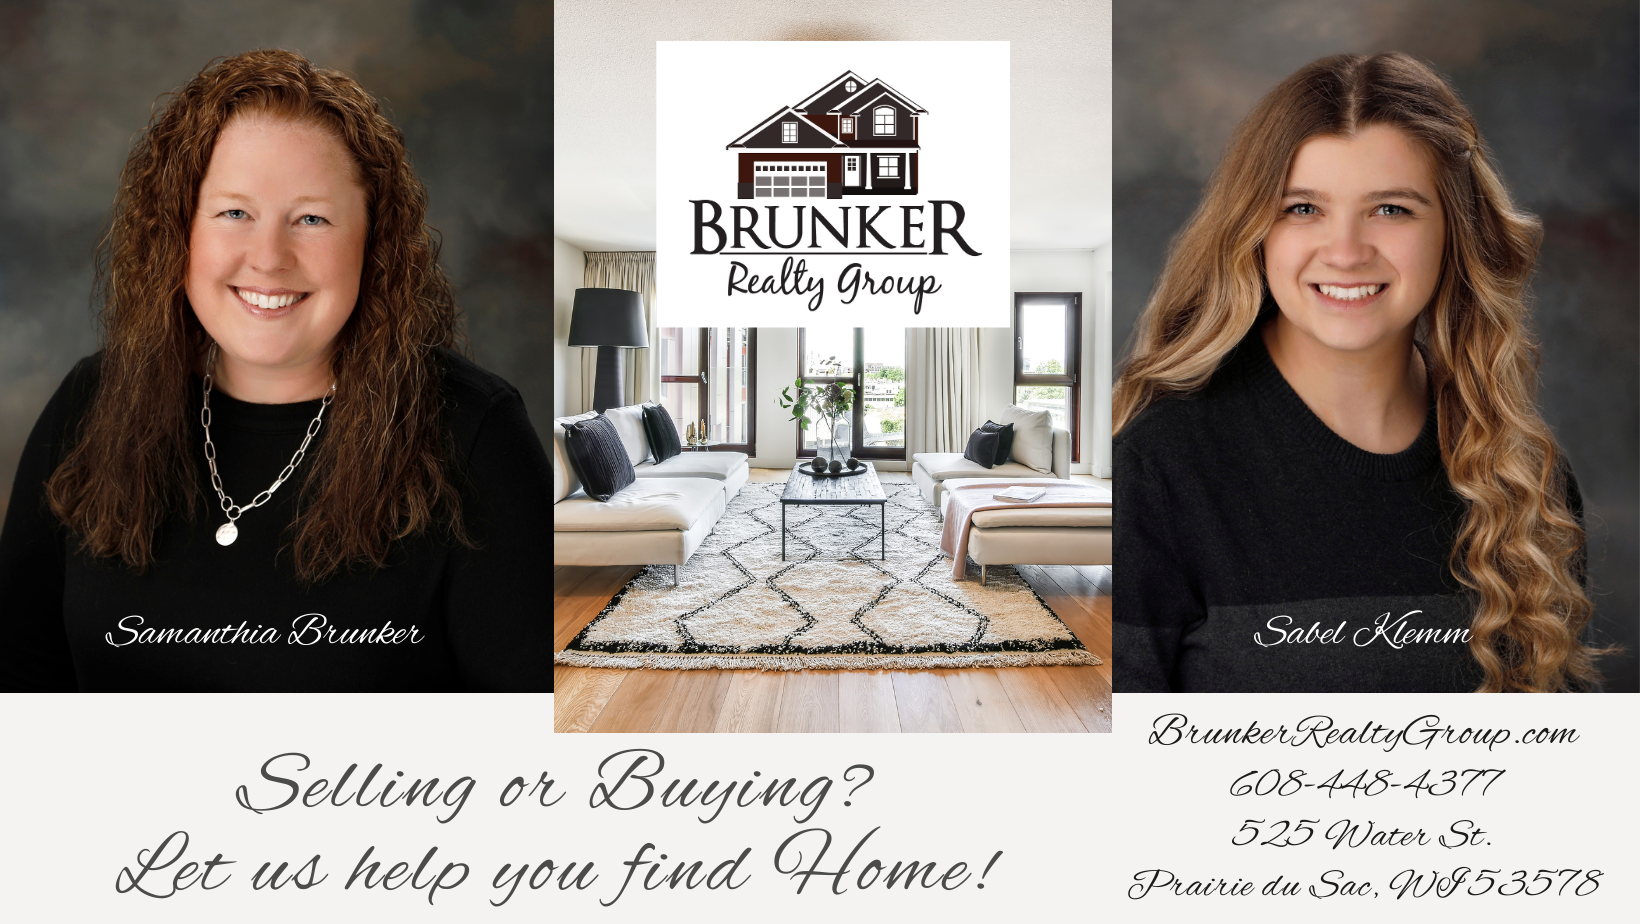 Image for Brunker Realty Group | Get to Know us!